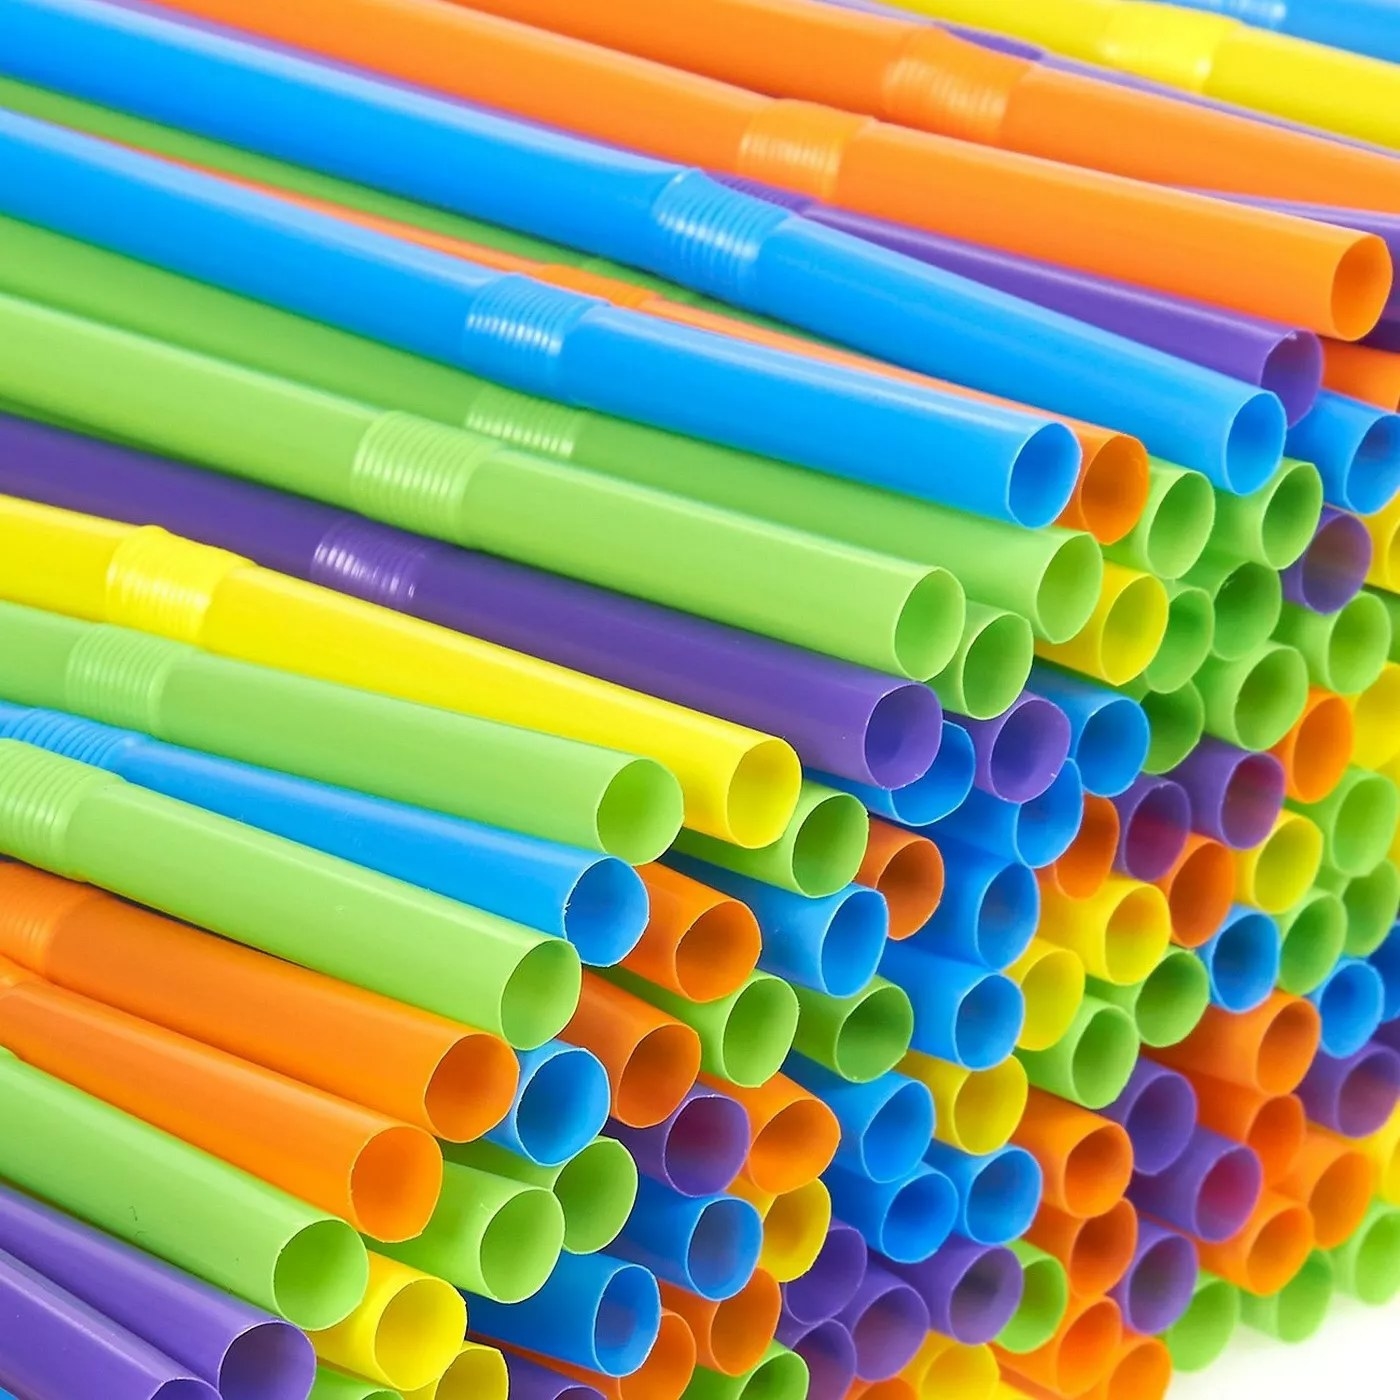 The colorful, flexible drinking straws